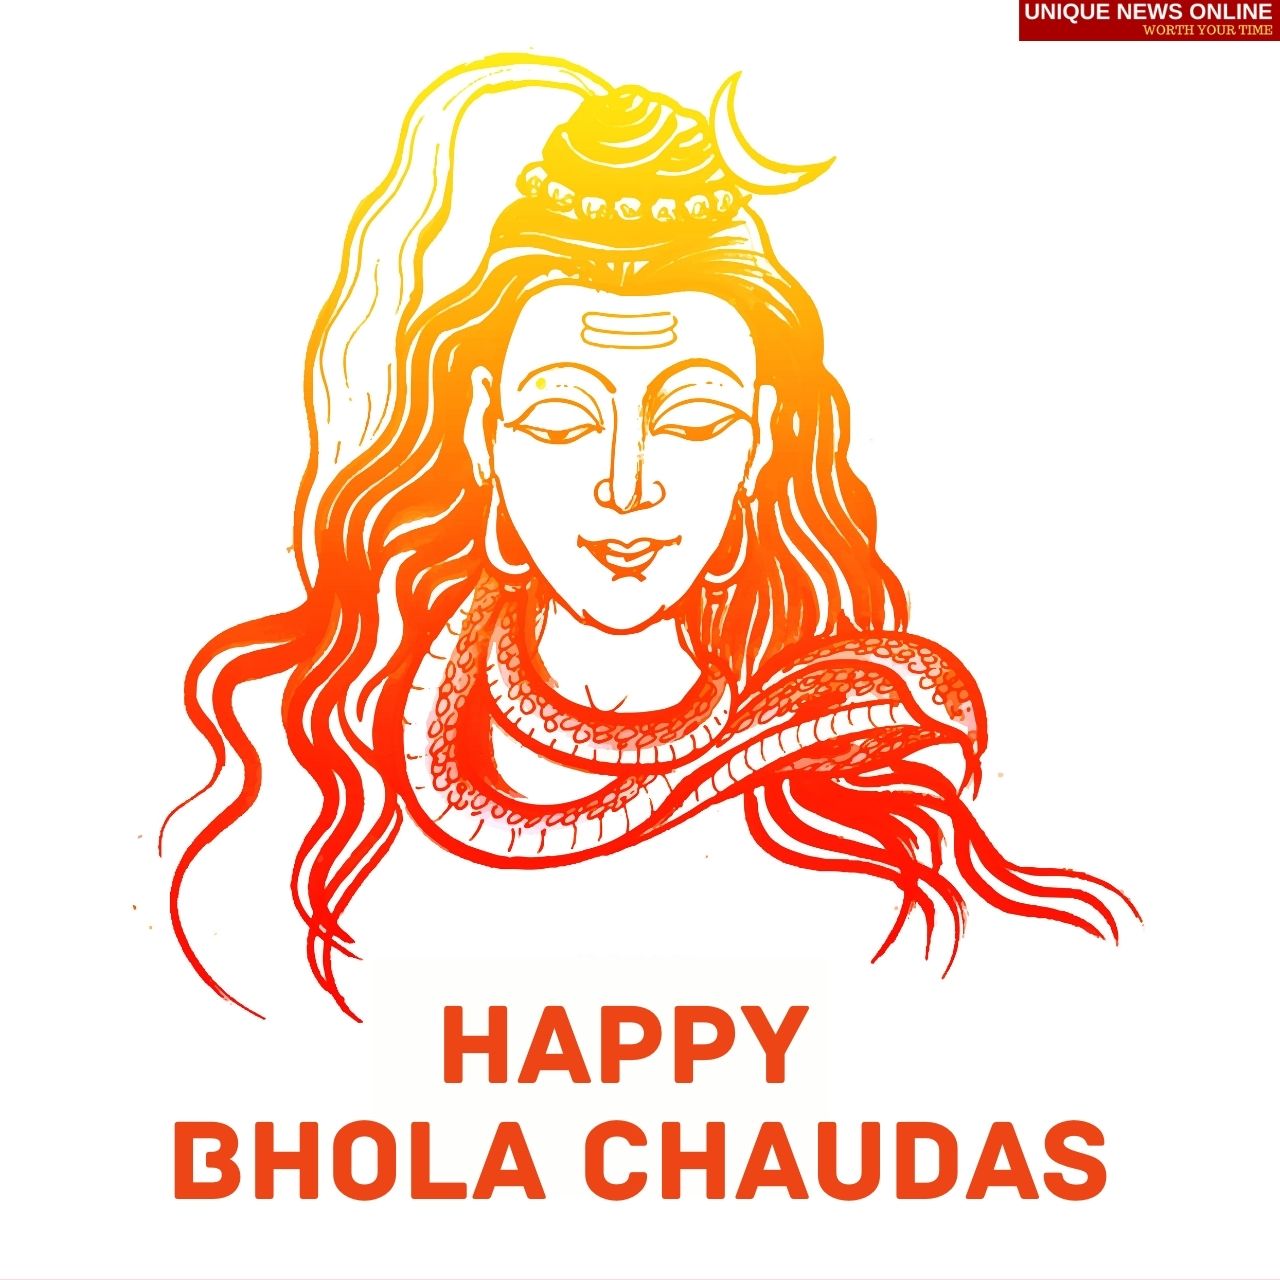 Bhola Chaudas 2022 Wishes, Greetings, Shayari, Messages, Quotes, HD Images to Share